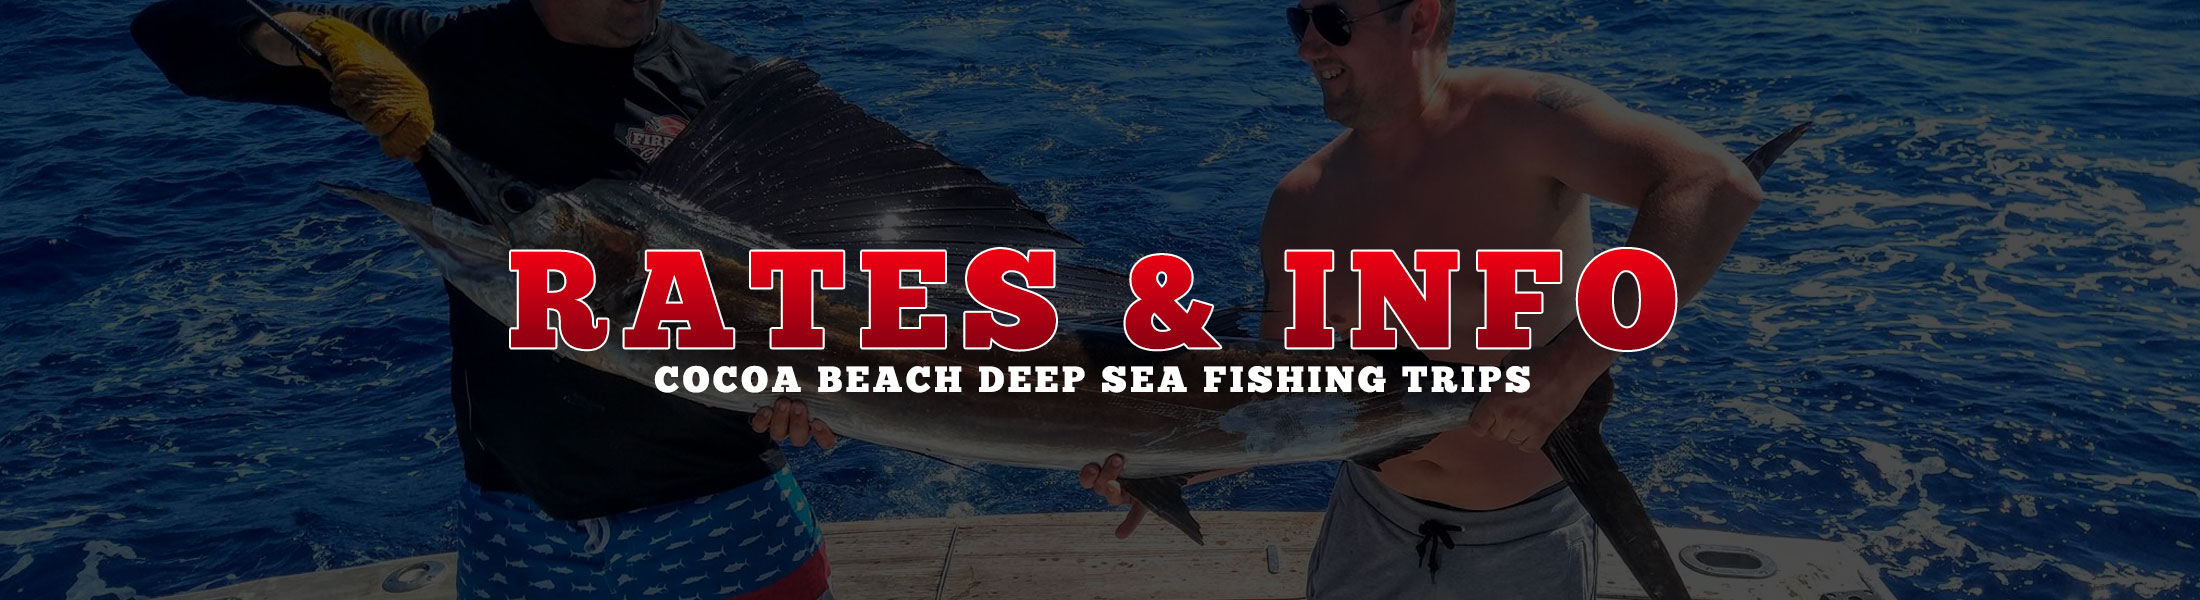 Get more information on rates from Fired Up Fishing Charters